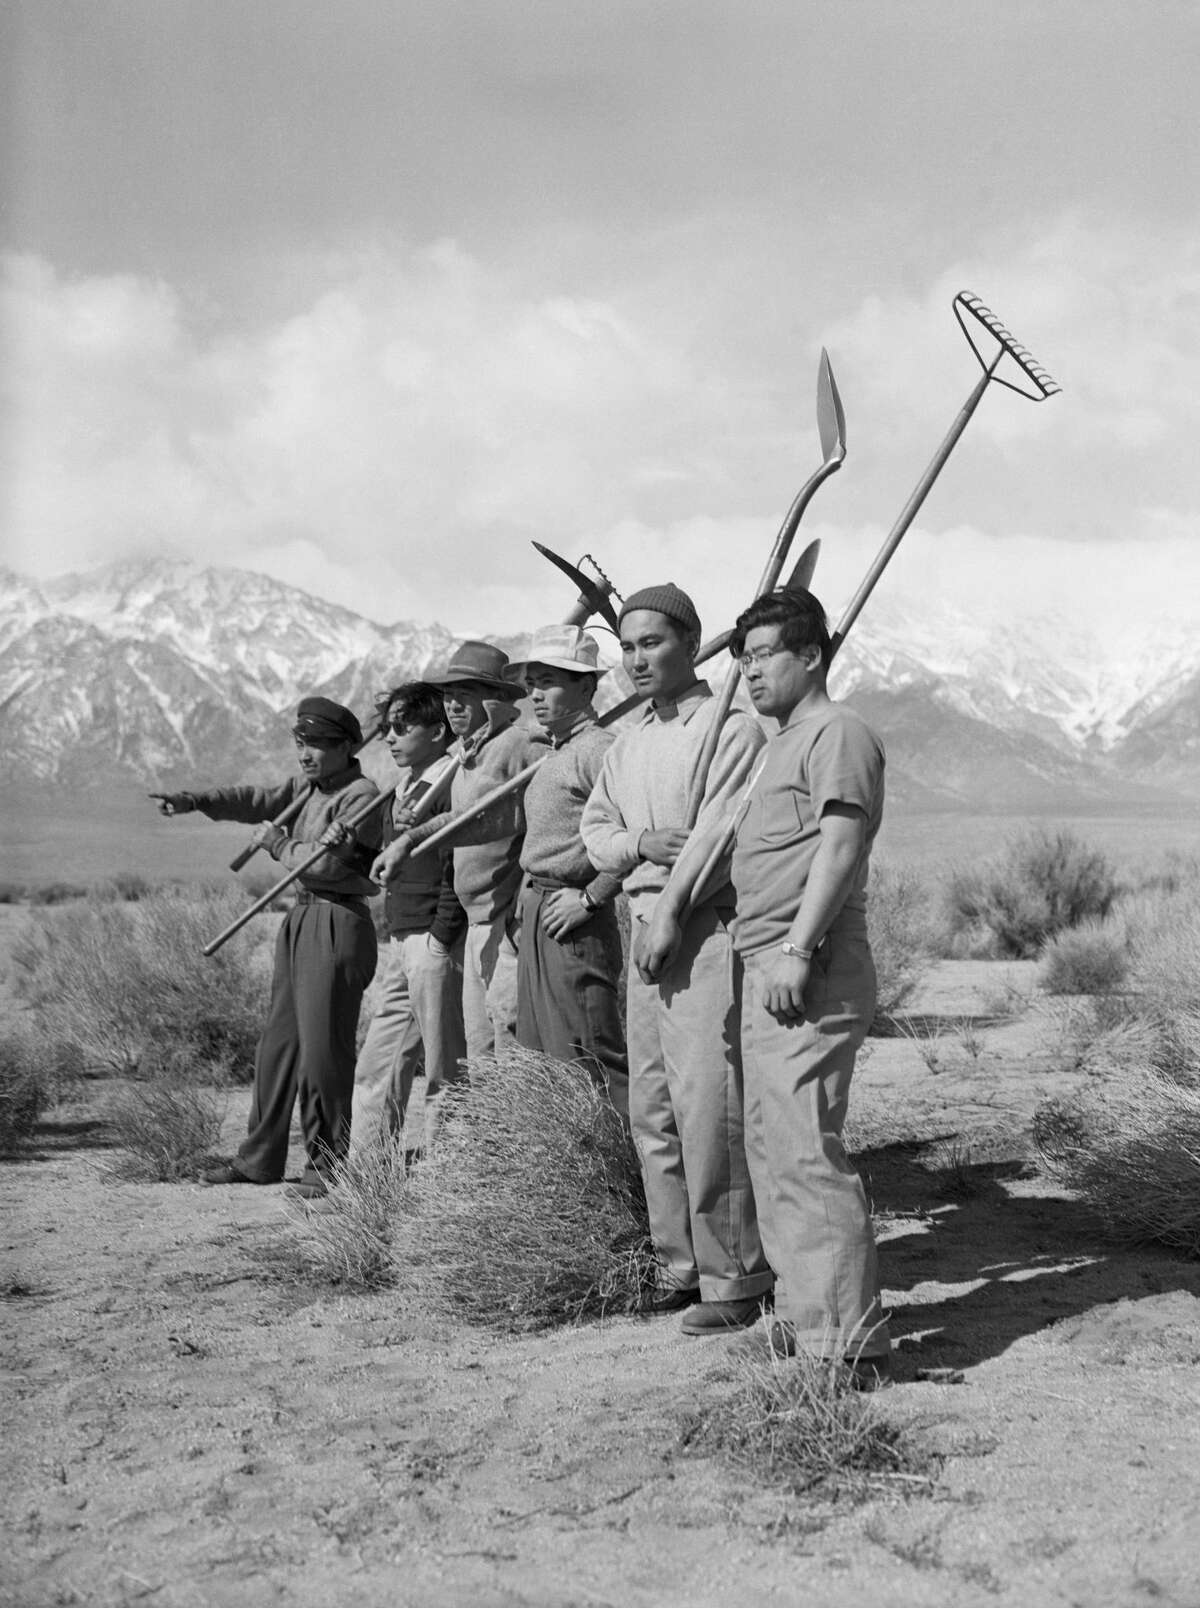 What life inside Japanese internment camps was like